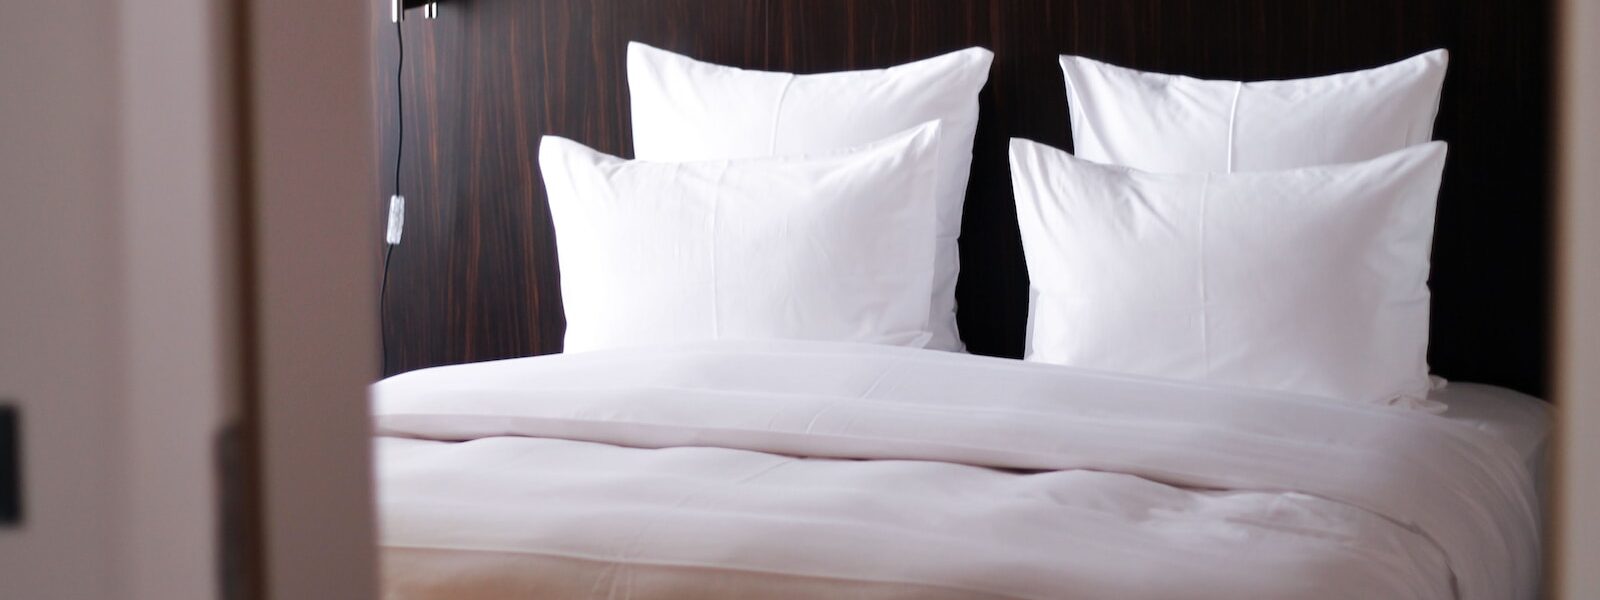 white bed pillow on white bed